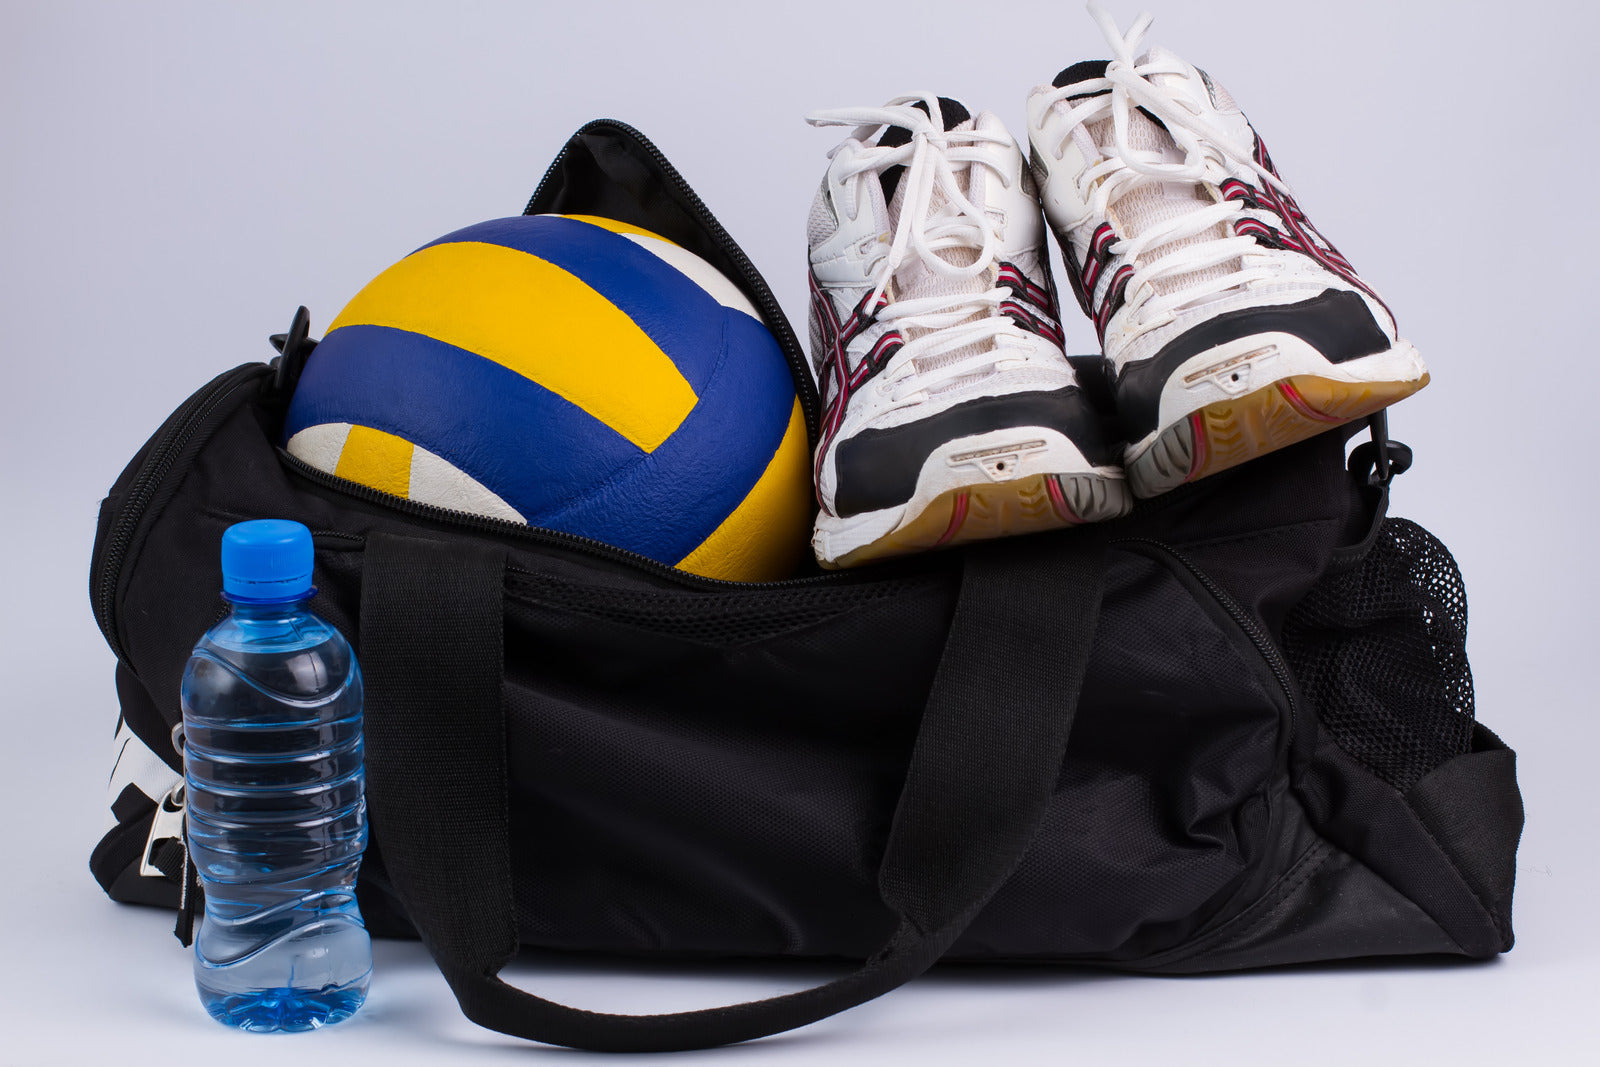 VOLLEYBALL GEAR: - WHAT do I need?